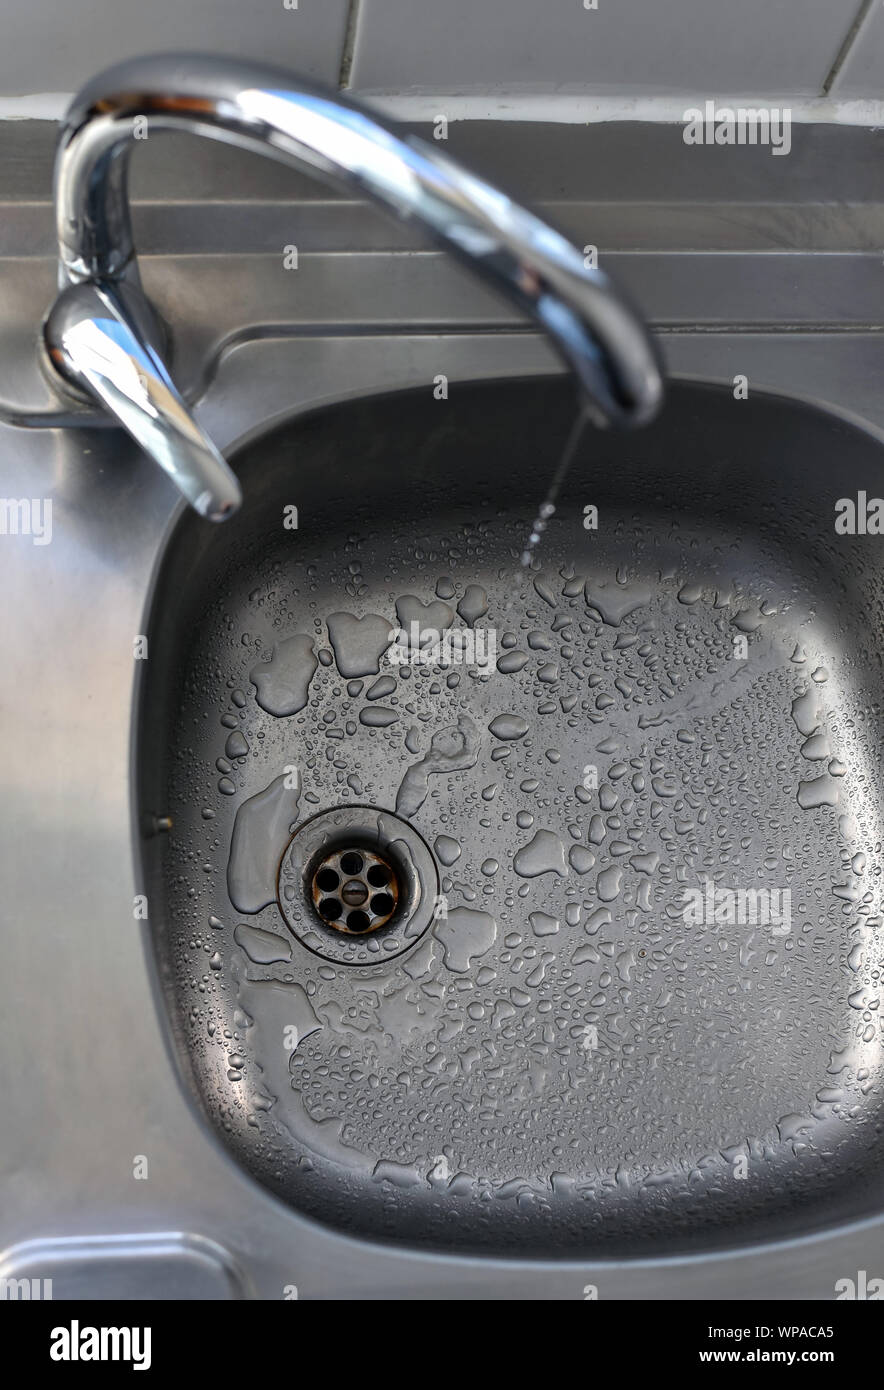 Clean water drops falling from a dripping kitchen faucet, an unnecessary waste of water in a world threatened by water scarcity. Stock Photo